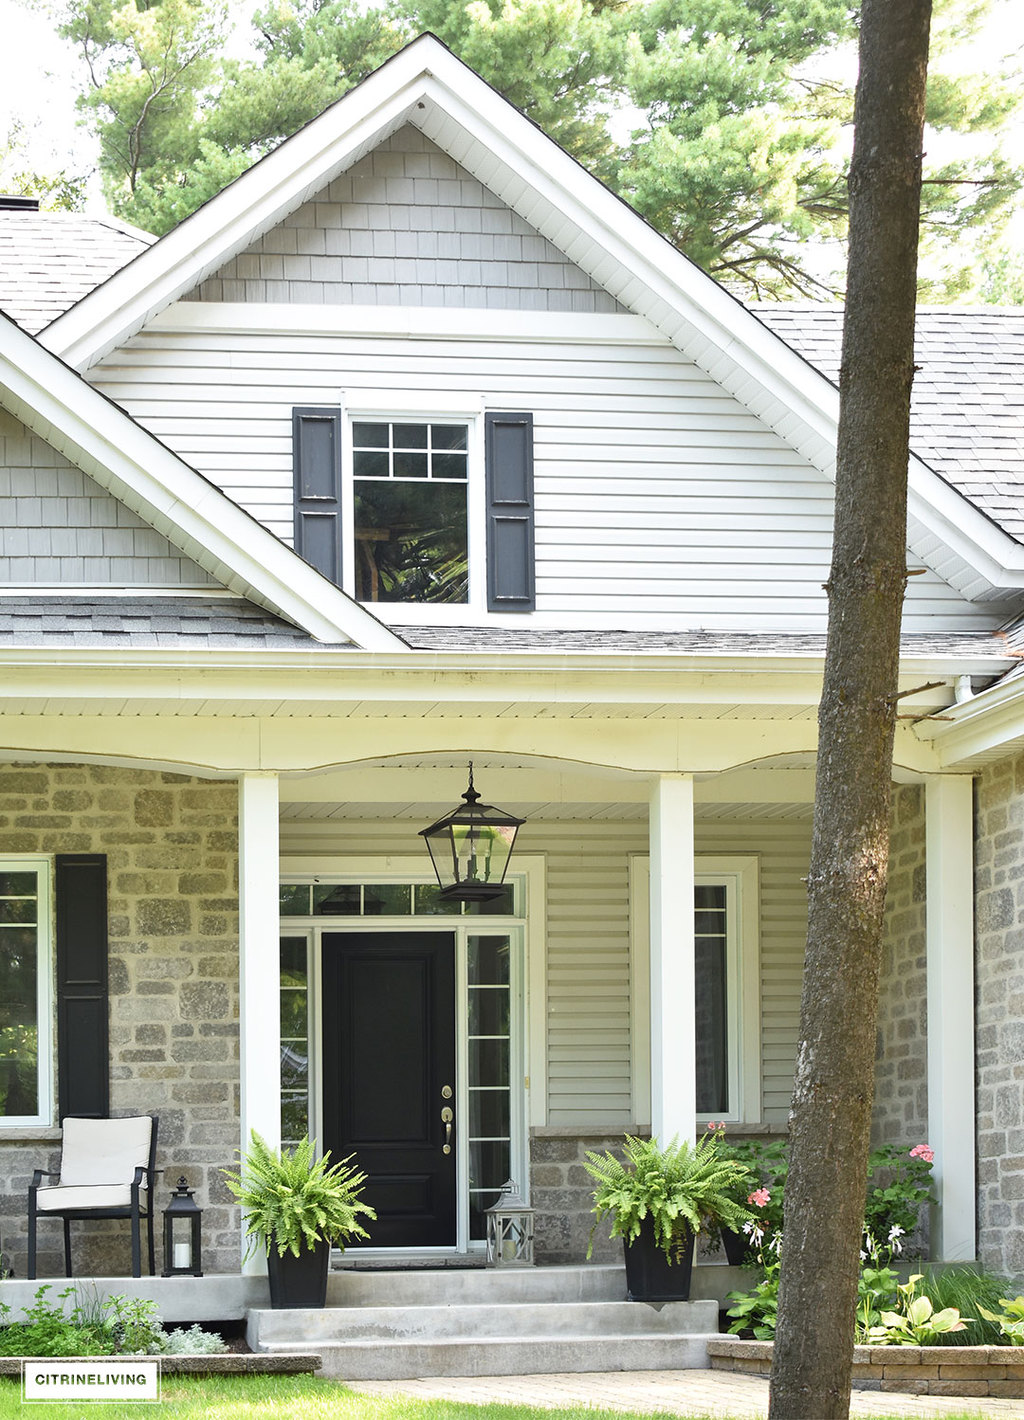 East coast style home featuring overscale black pendant porch light - Crestwood pendant by Progress Lighting - black front door, black shutters and two-tone grey siding and stone.